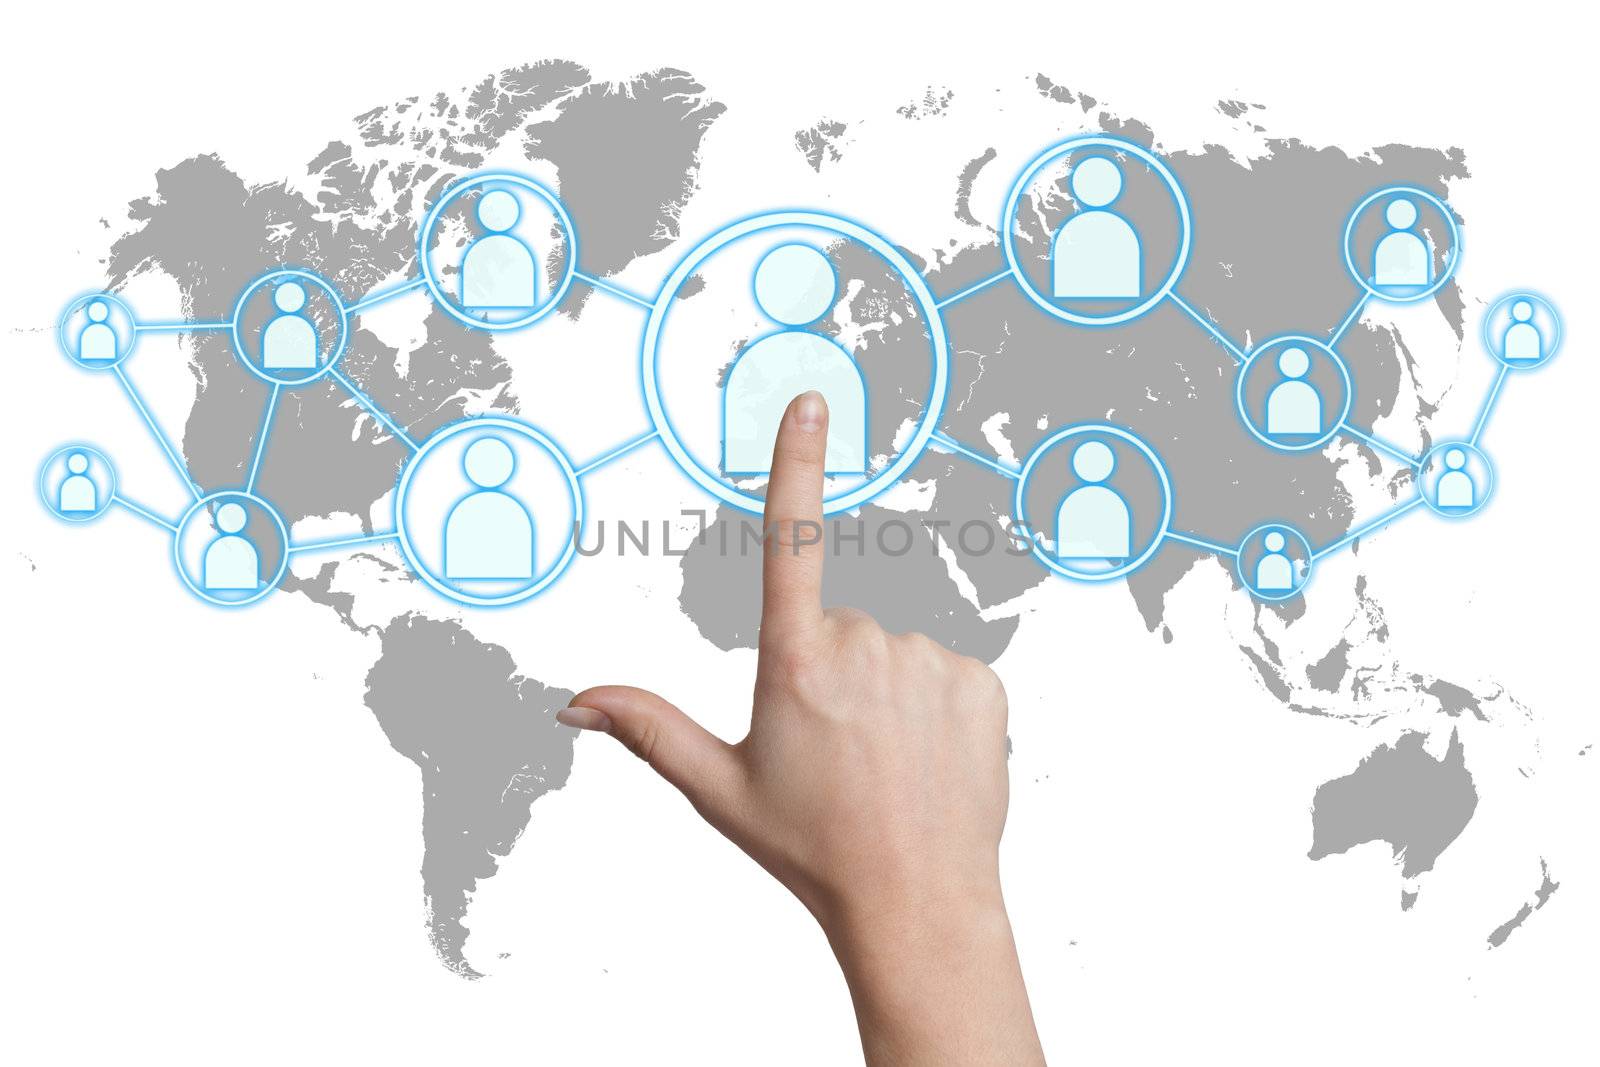 woman hand pressing social media icon on white background with world map